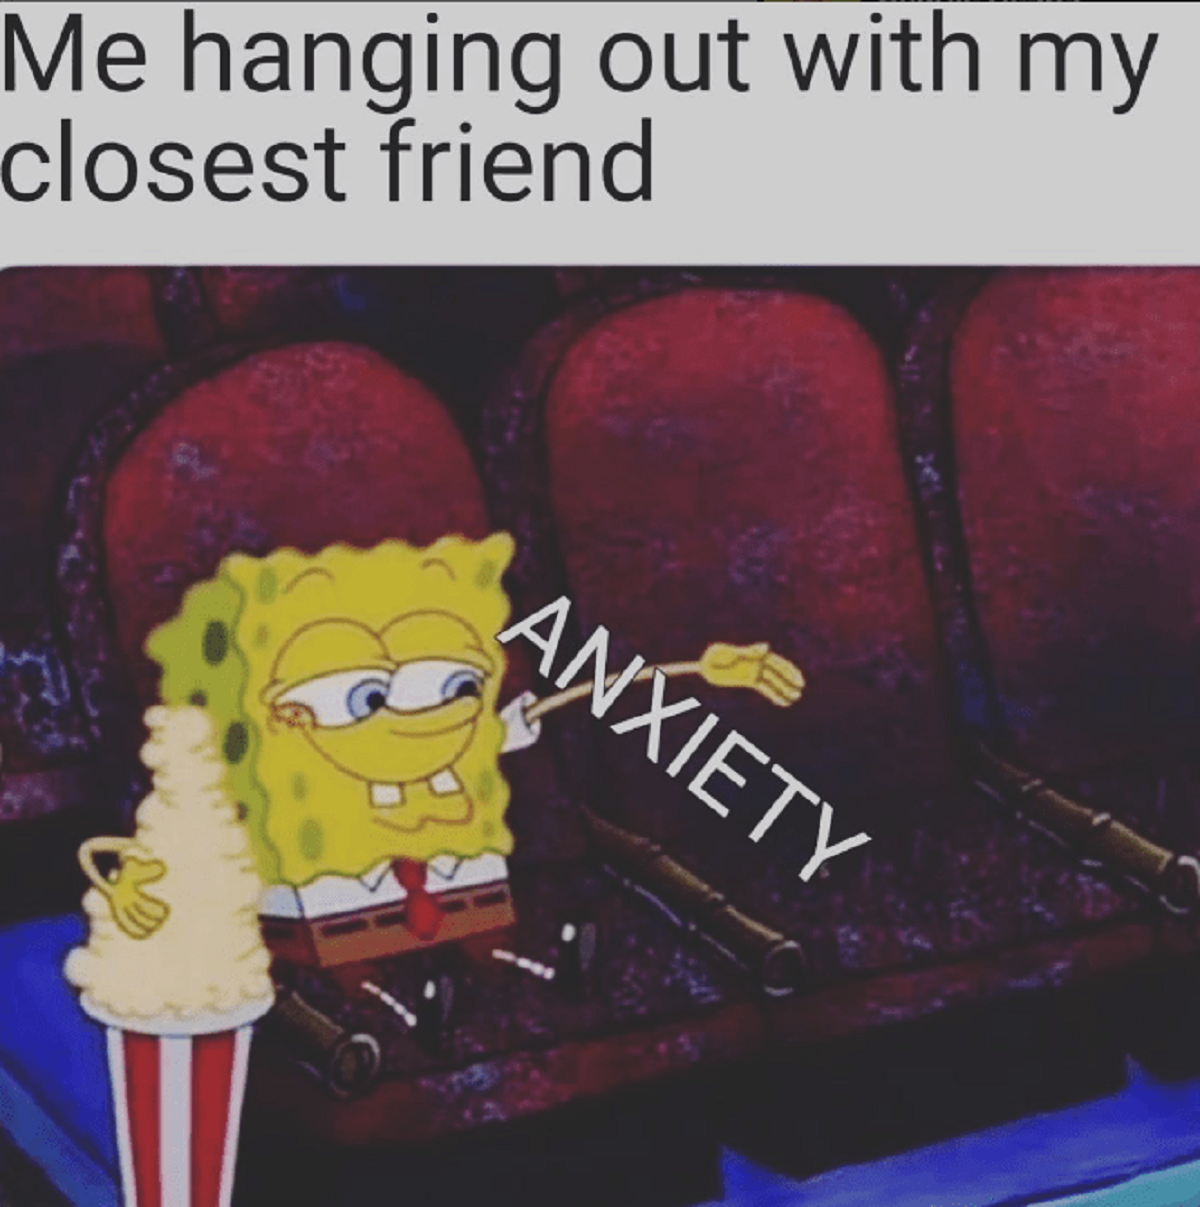 42 Funny Self-Deprecating Memes the Ask the Question 'Why Me?' 